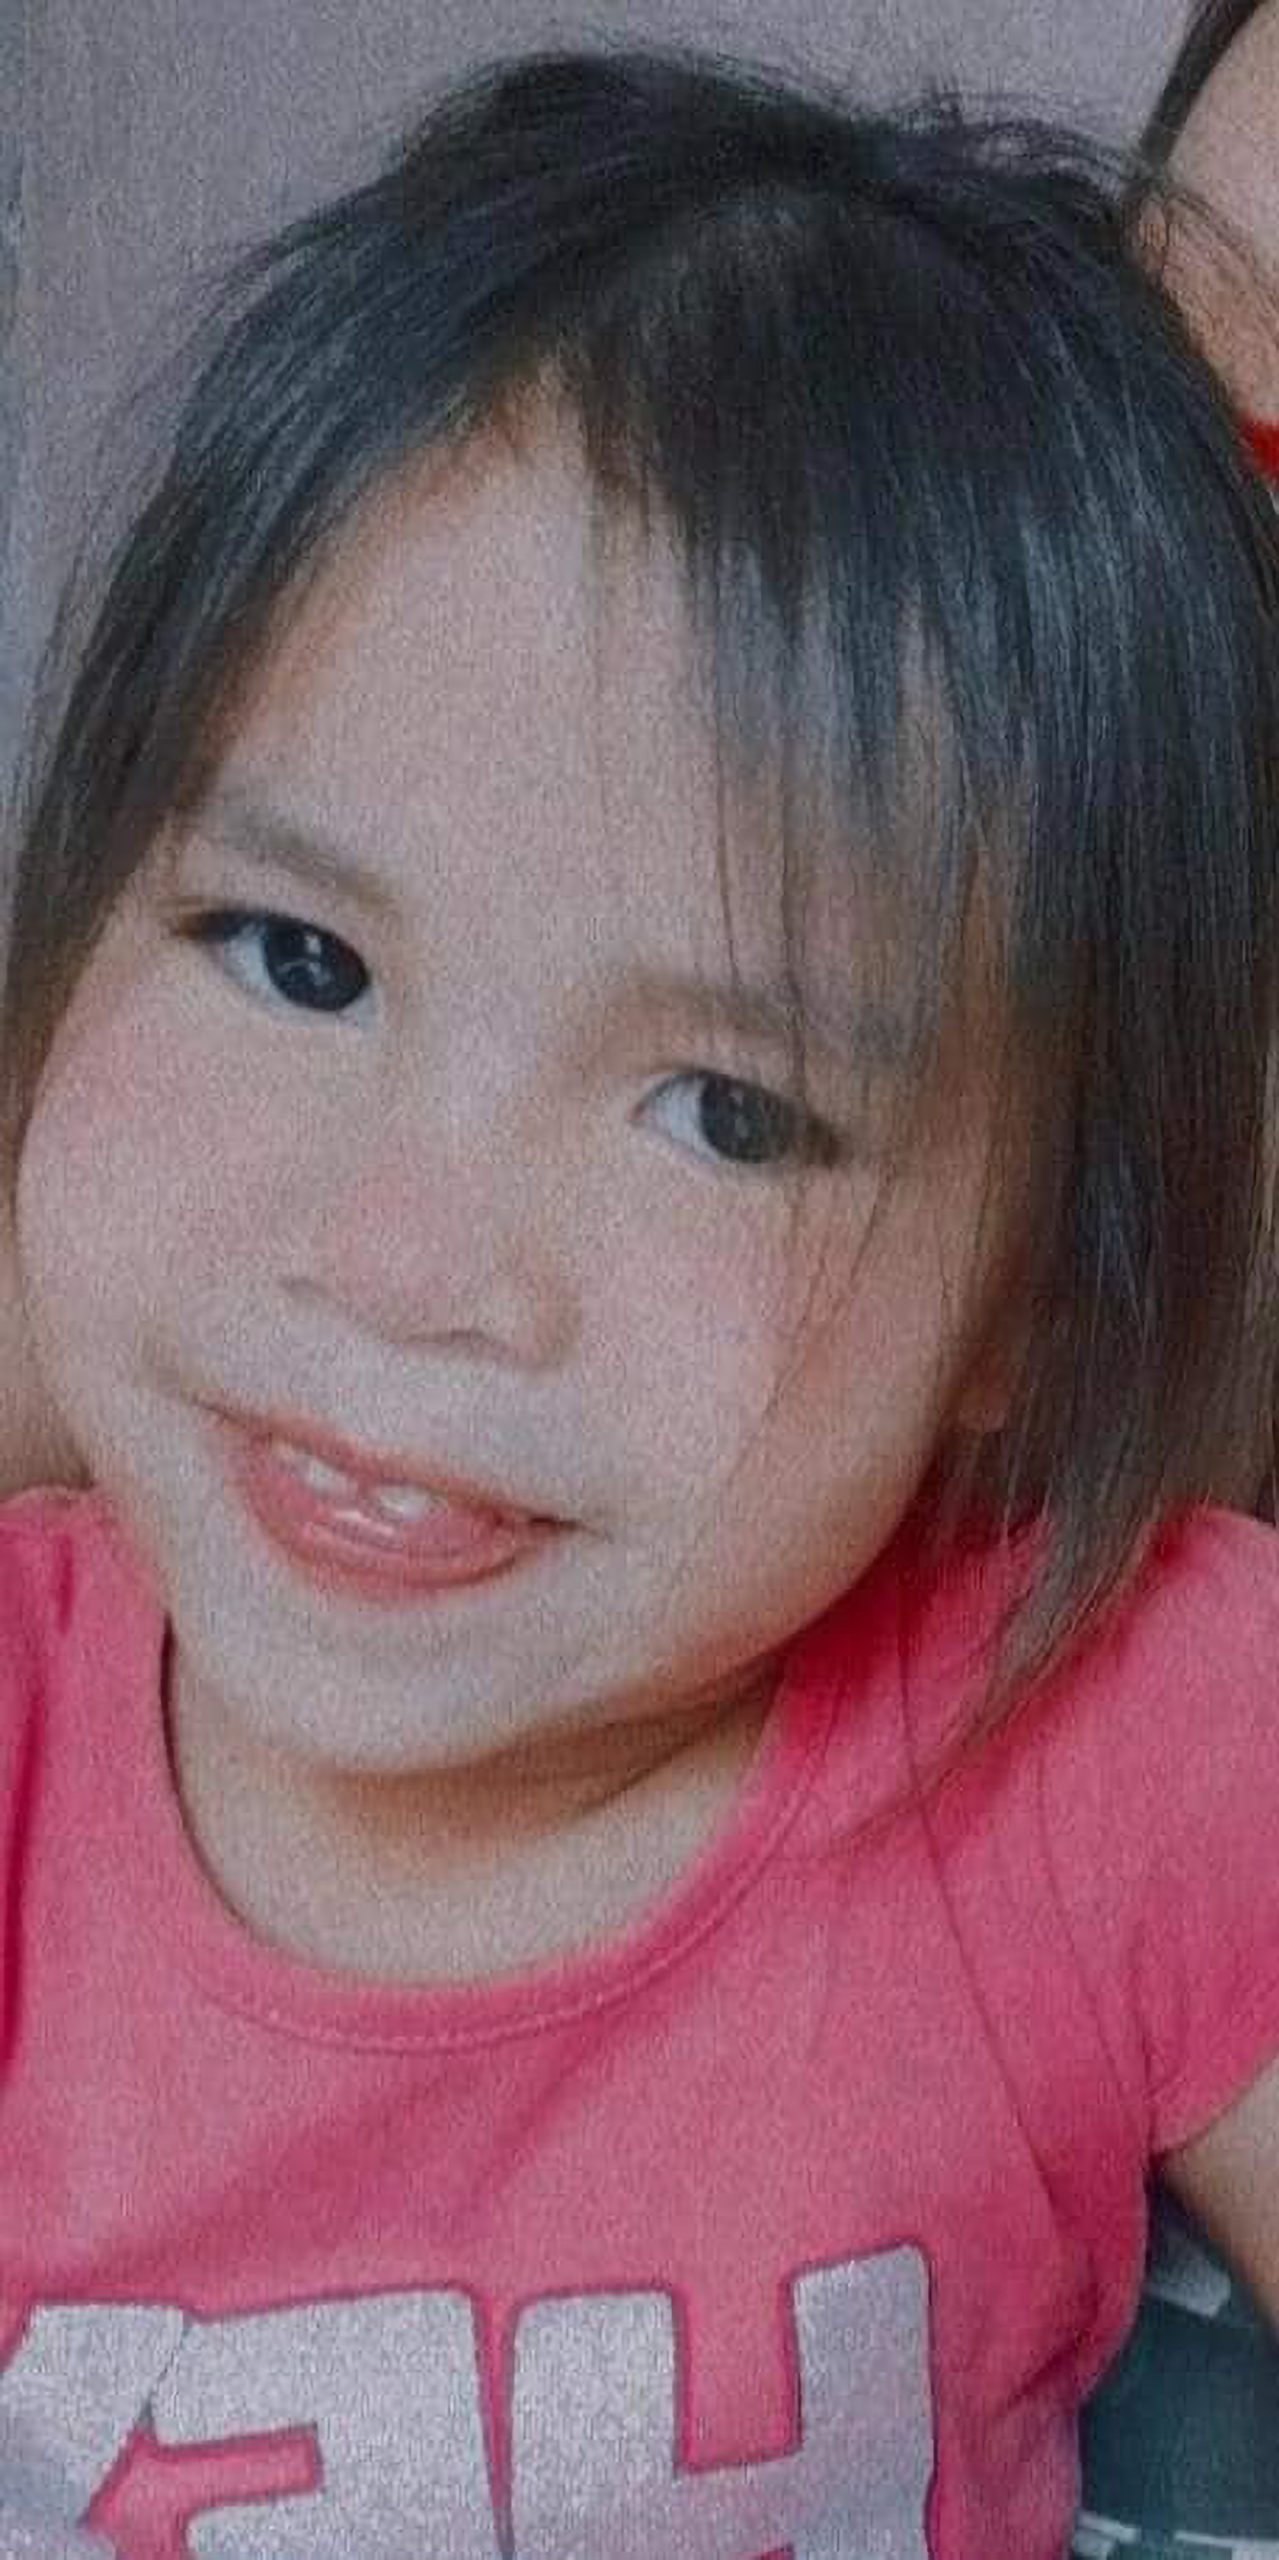 Read more about the article Teen Idiot Kills Sleeping Girl, 4, On Christmas Day By Throwing Firework Into Her Bedroom